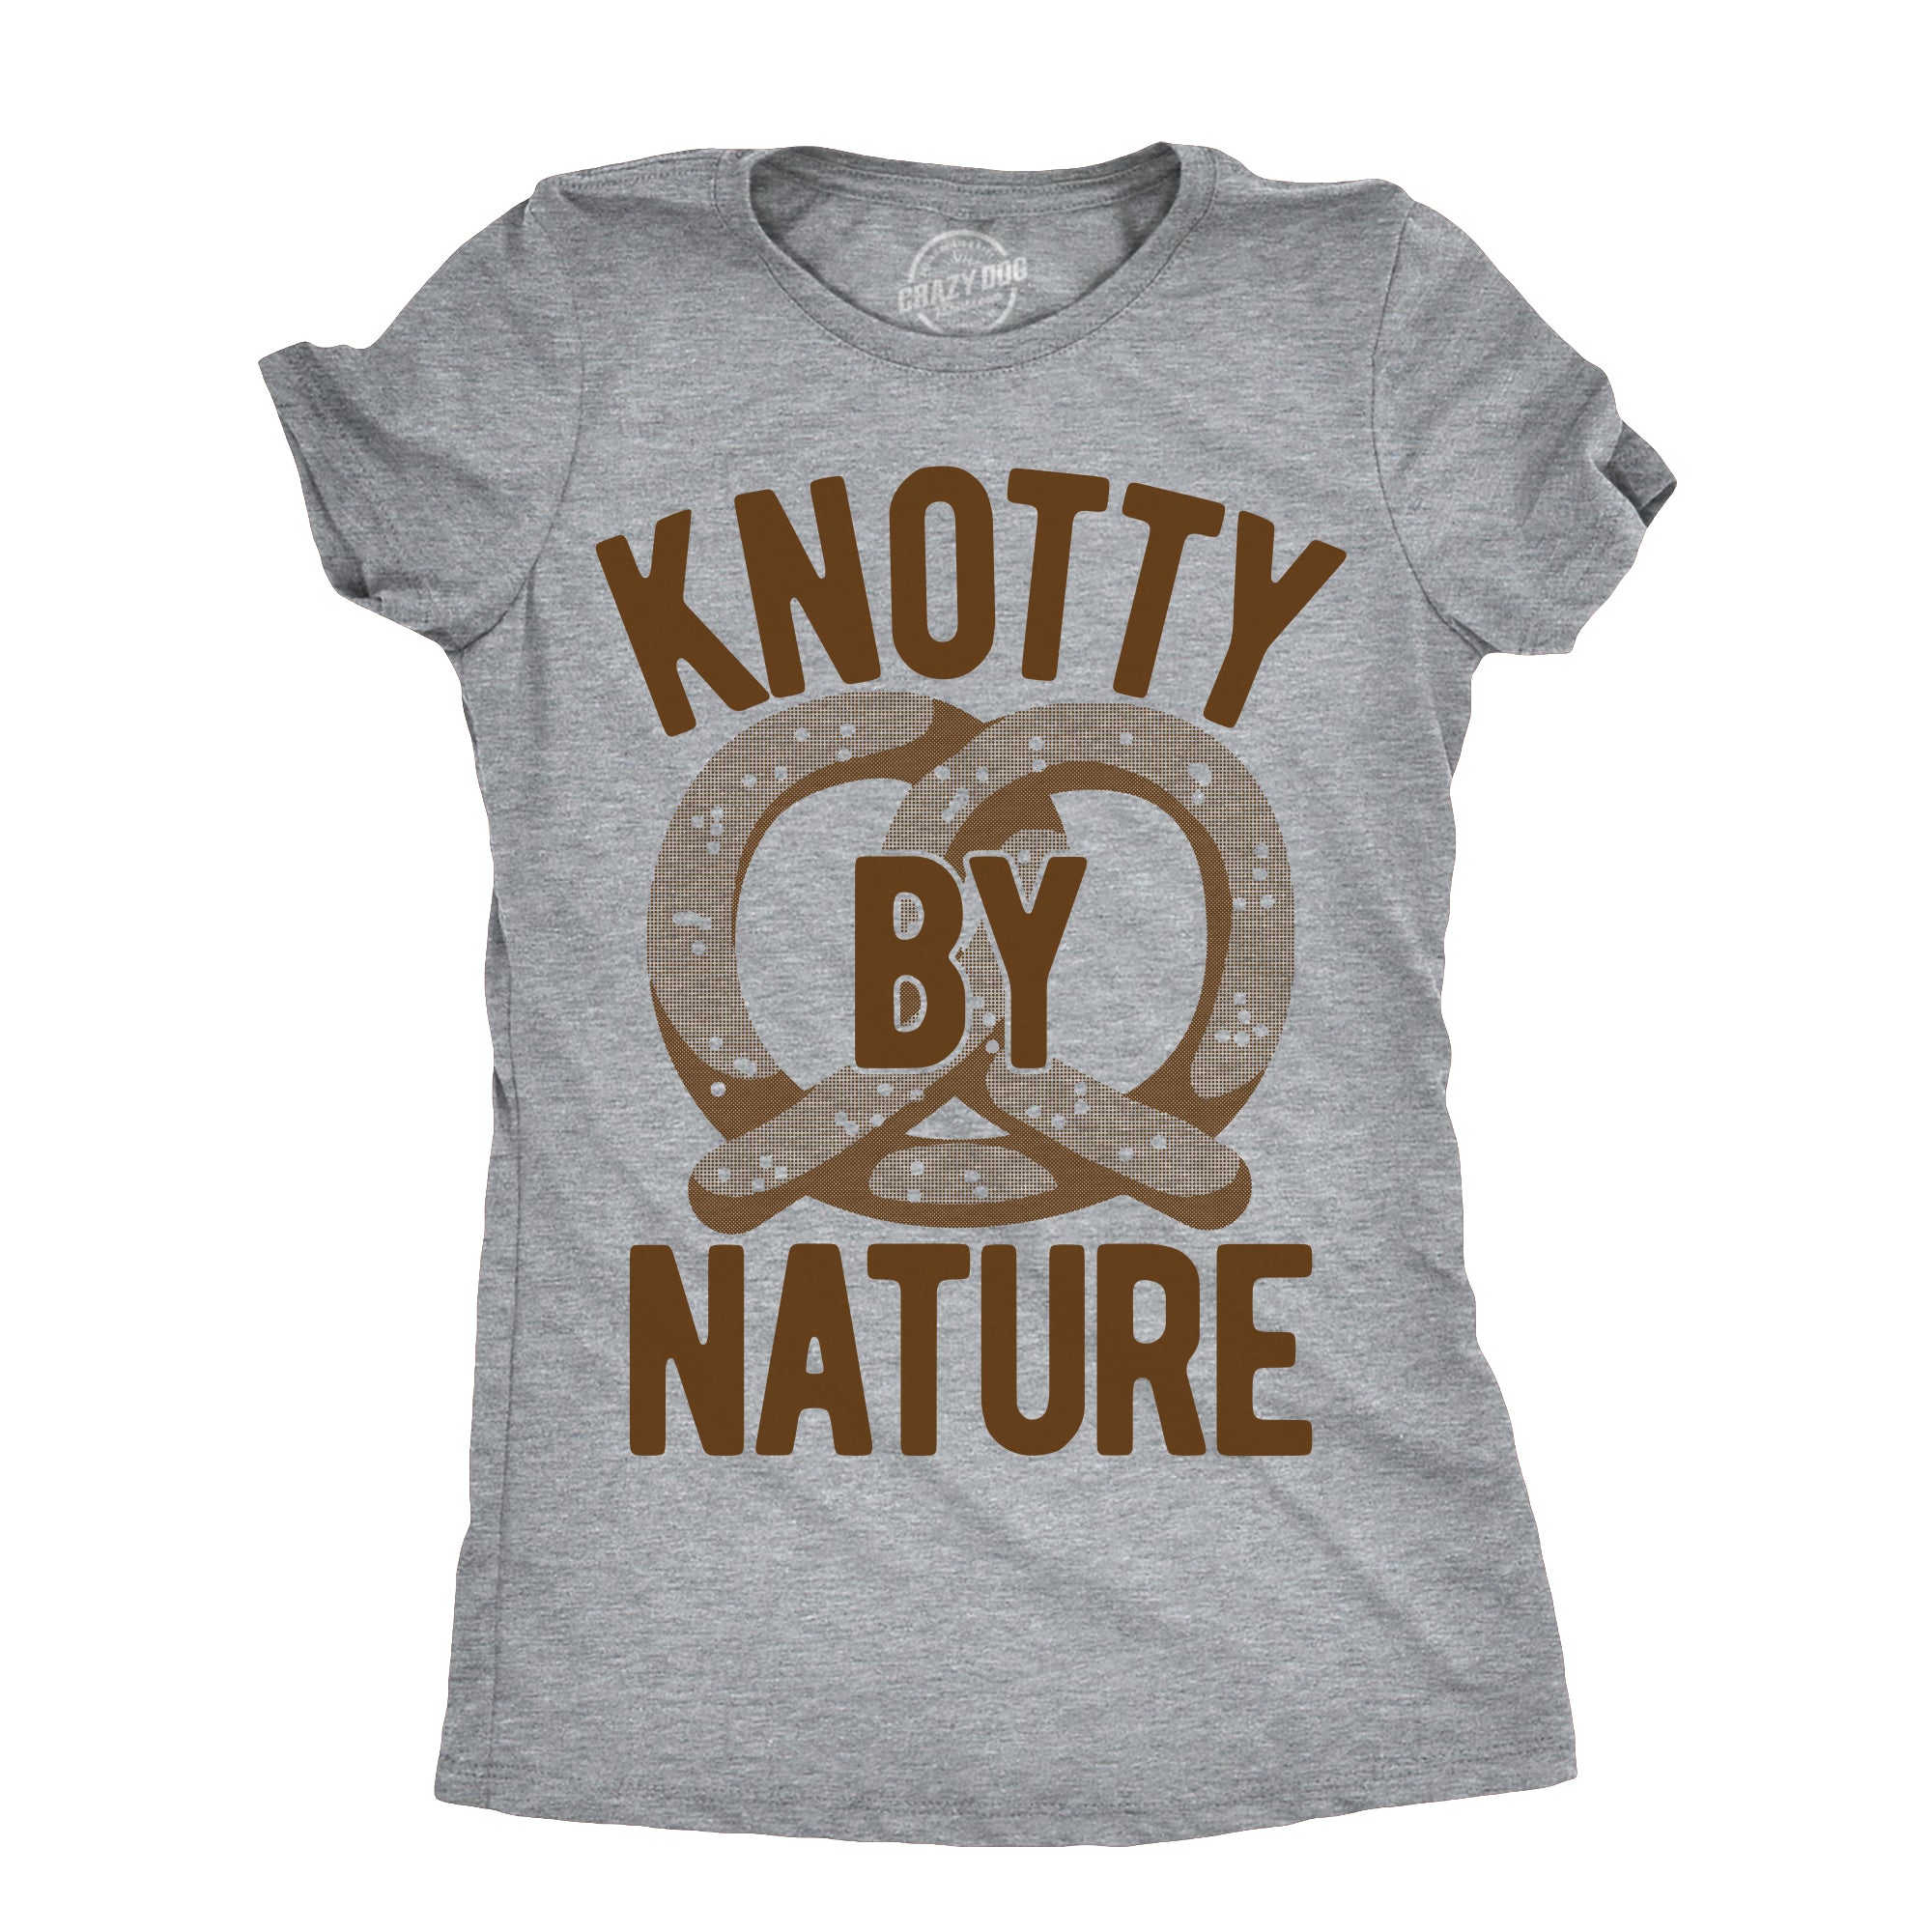 Funny Light Heather Grey - KNOTTY Knotty By Nature Womens T Shirt Nerdy Food sarcastic Tee